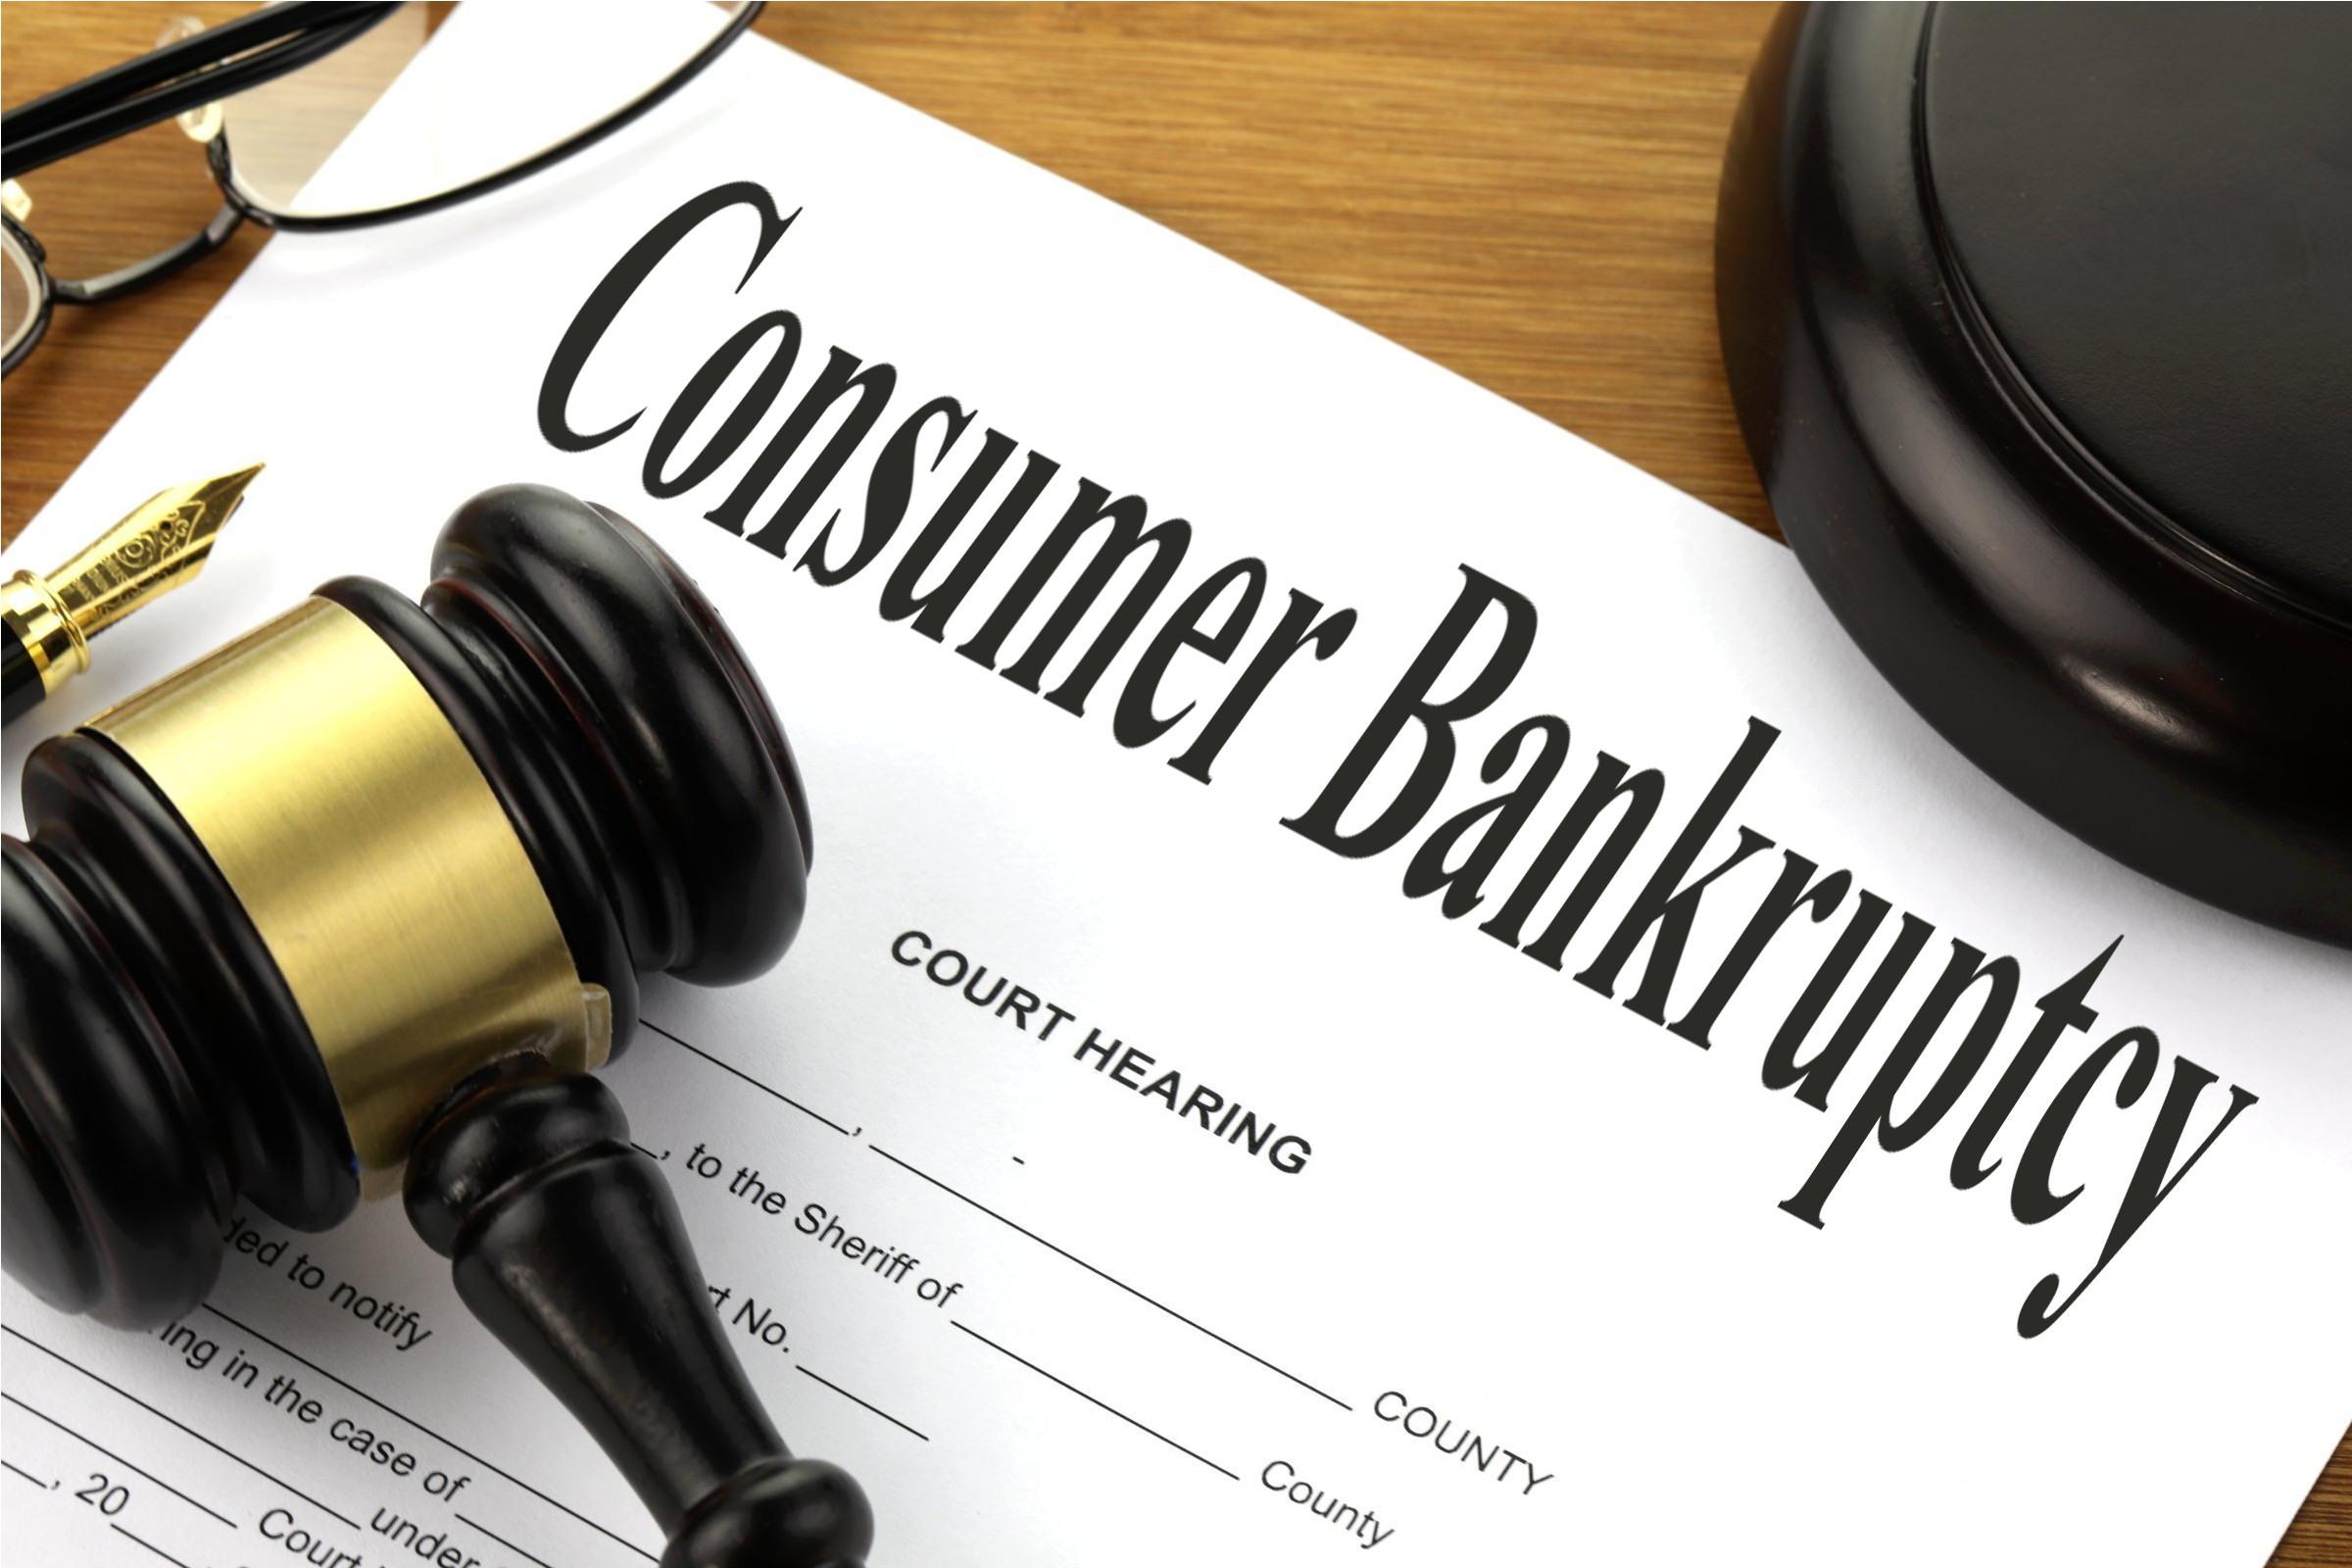 consumer bankruptcy